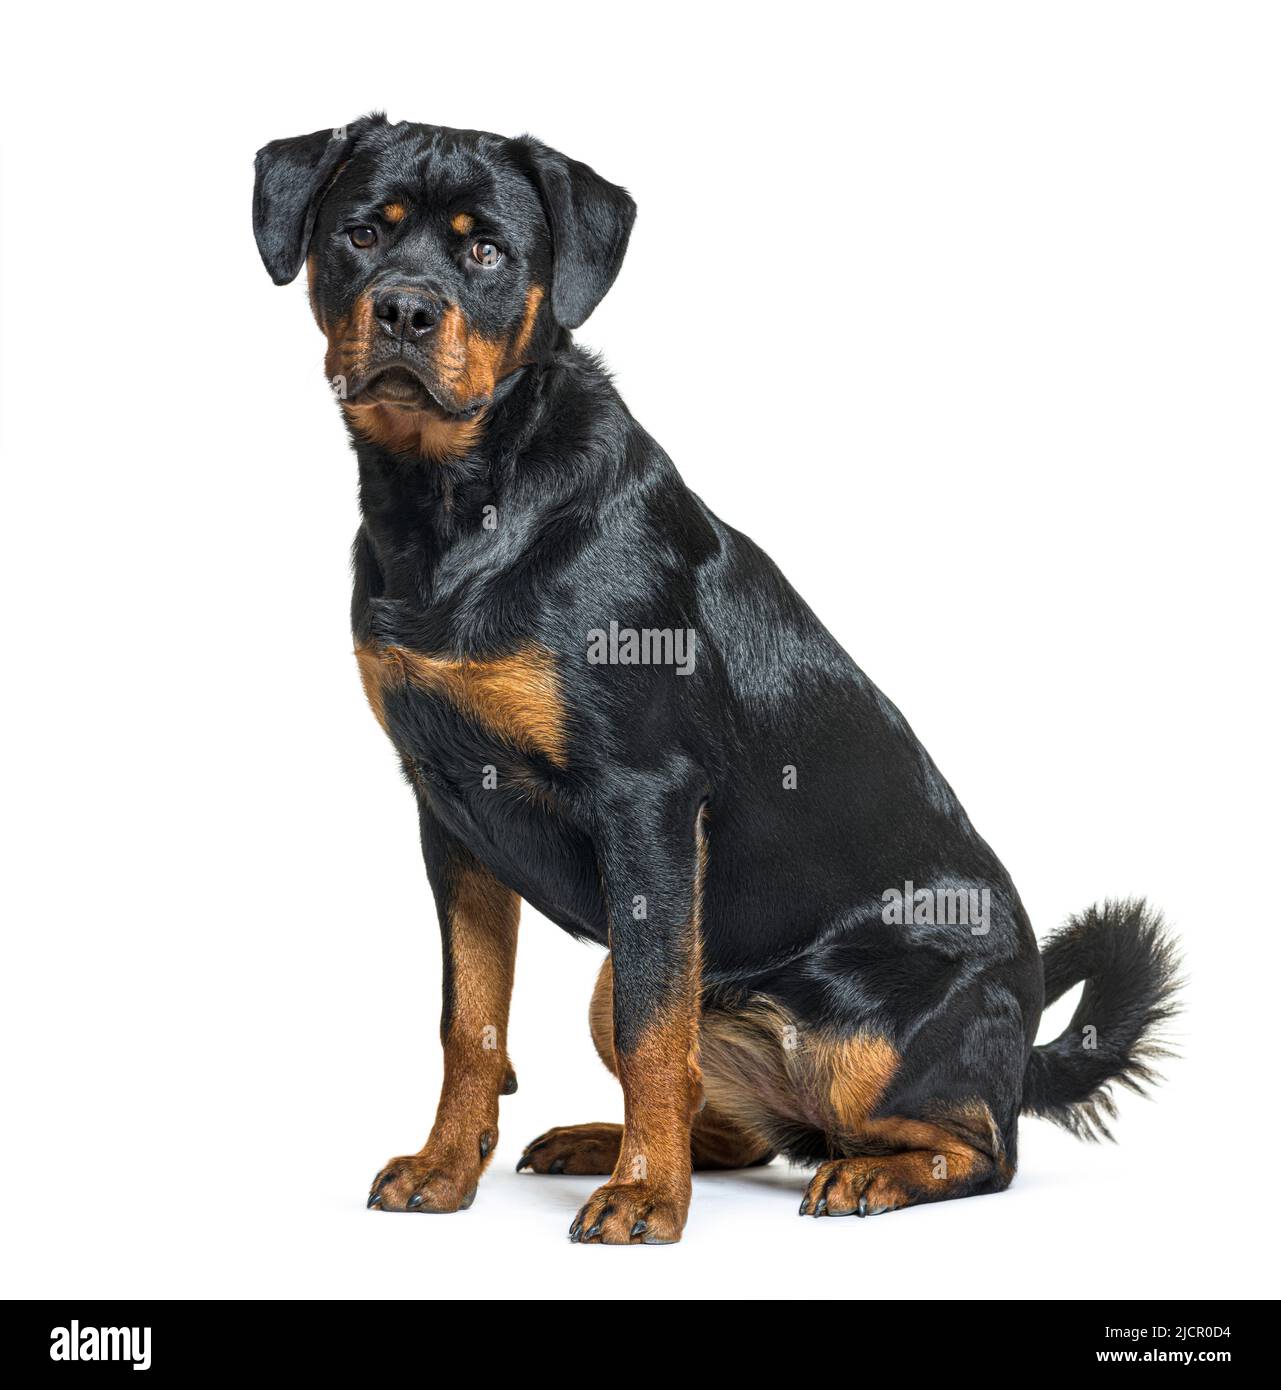 Young rottweiler dog sitting, side view and looking at the camera Stock Photo